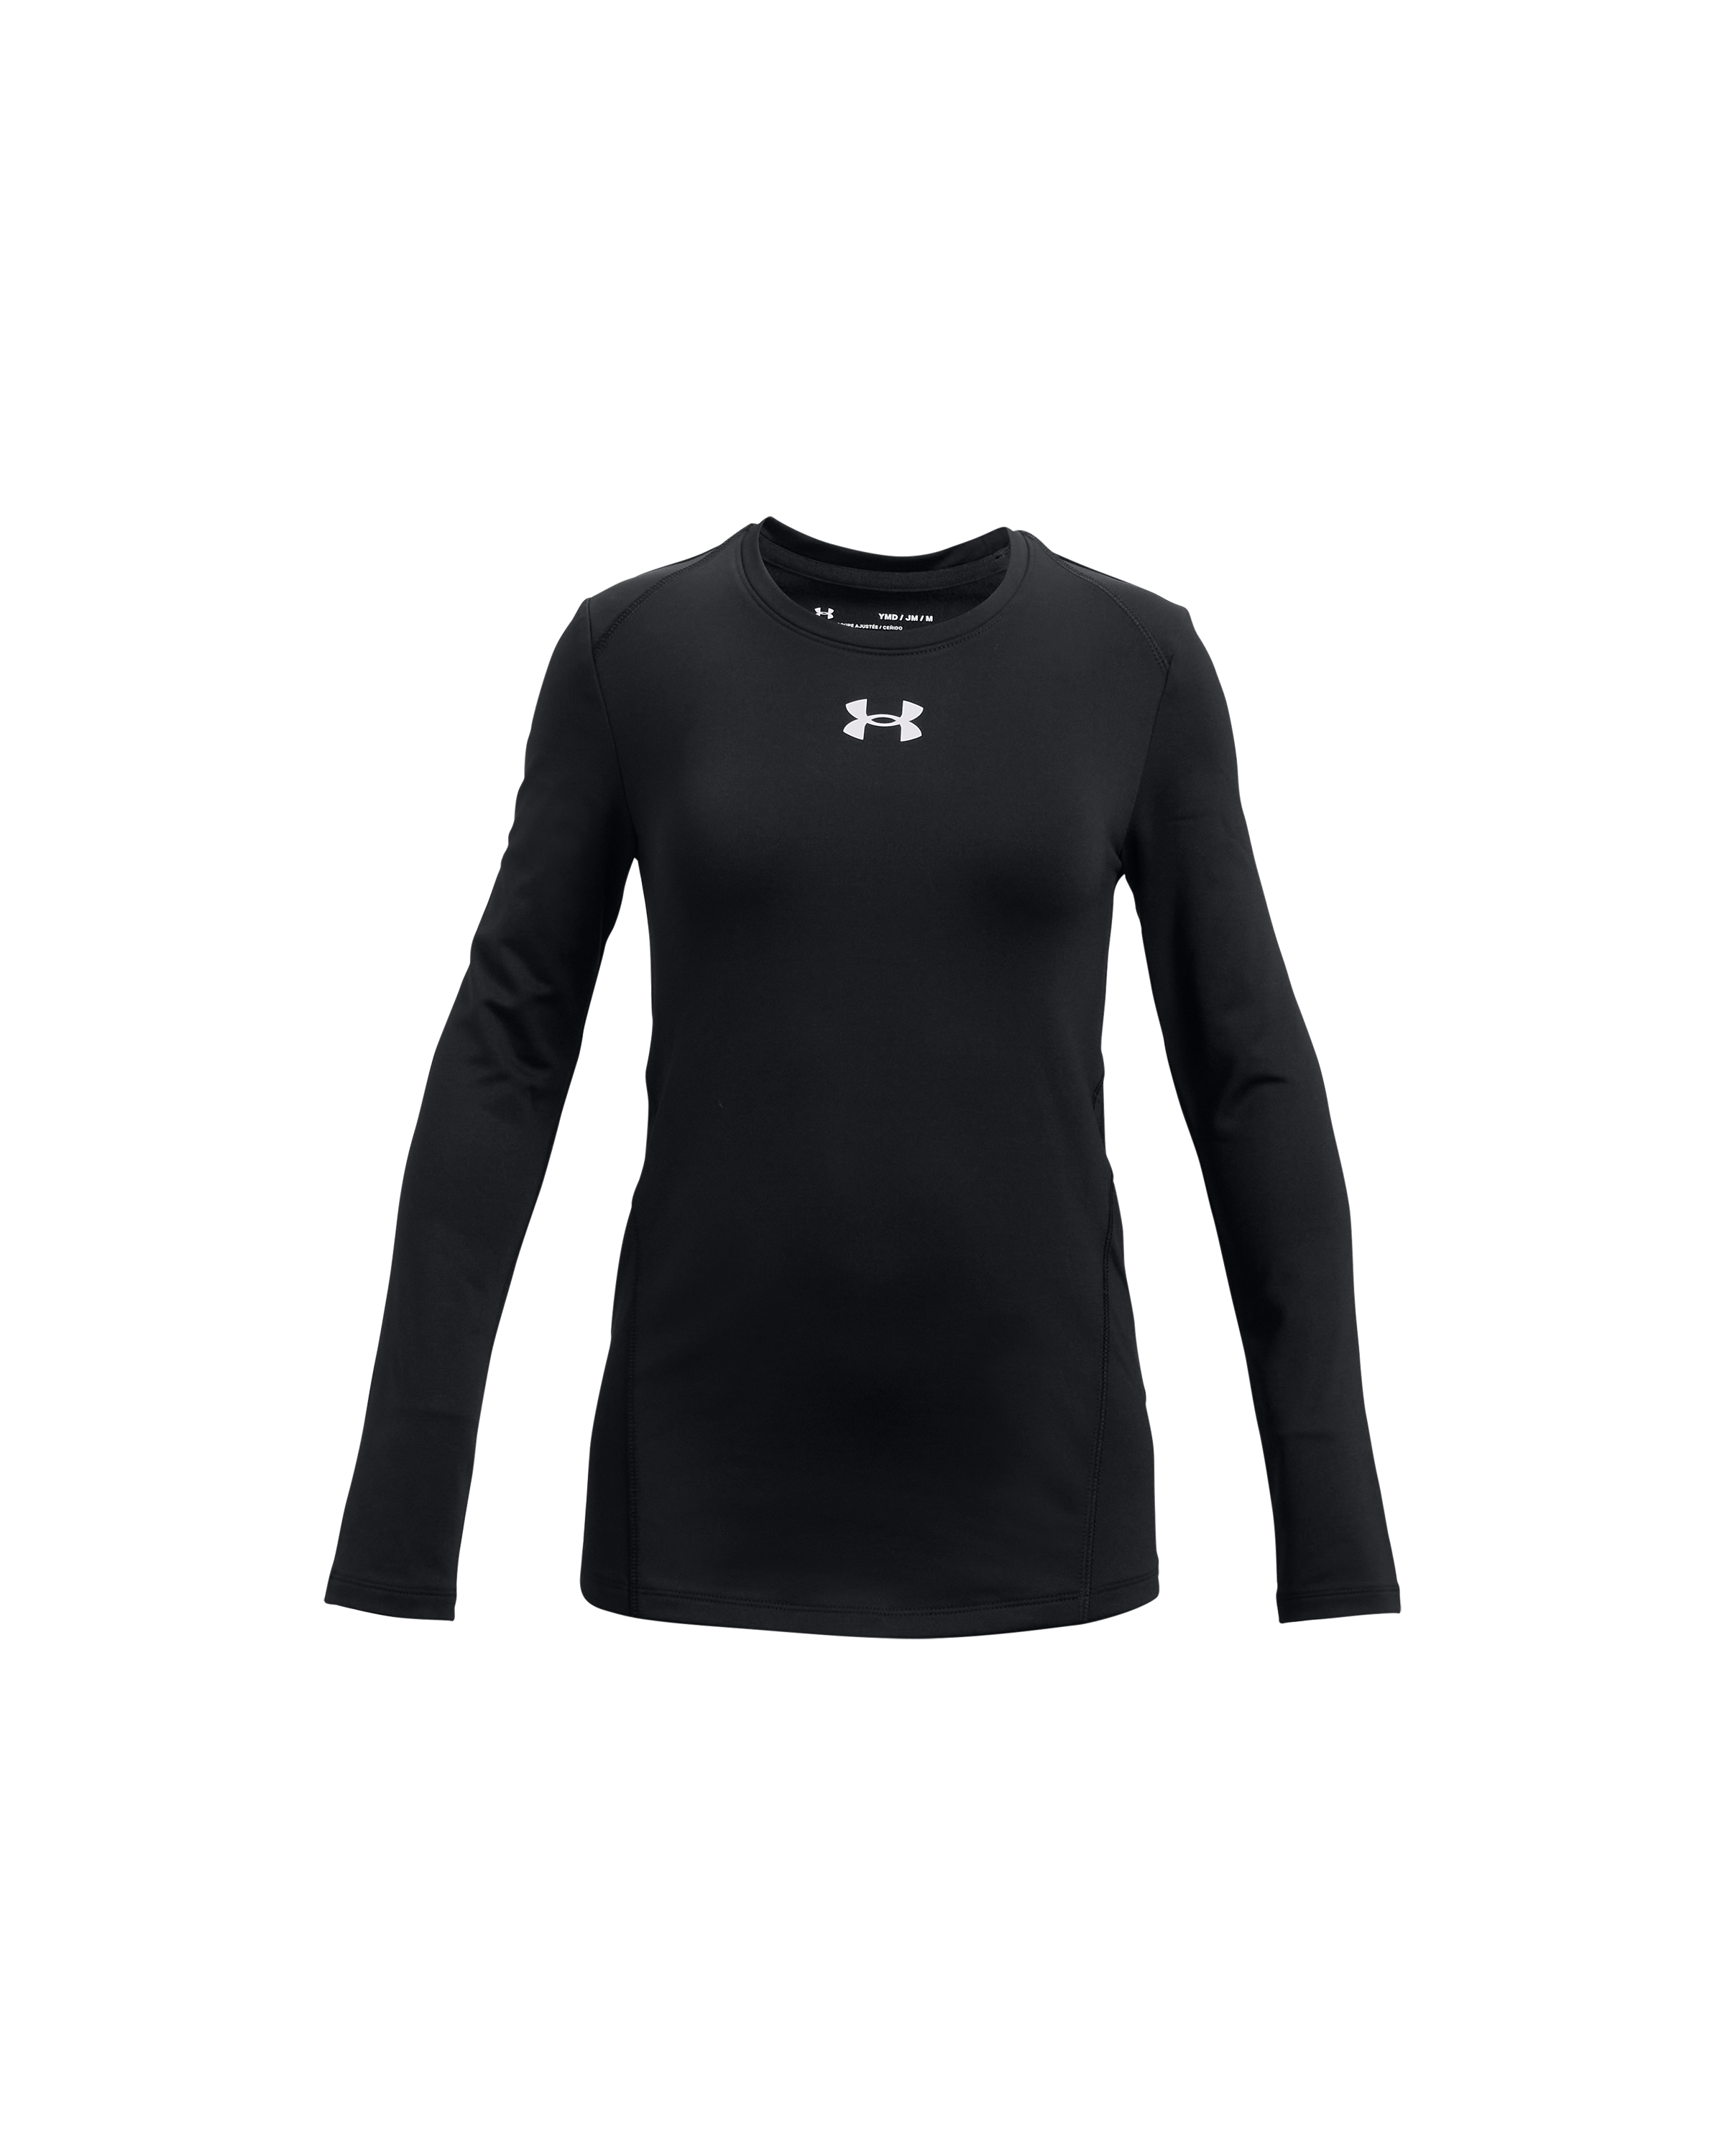 Girls' ColdGear Long Sleeve from Under Armour